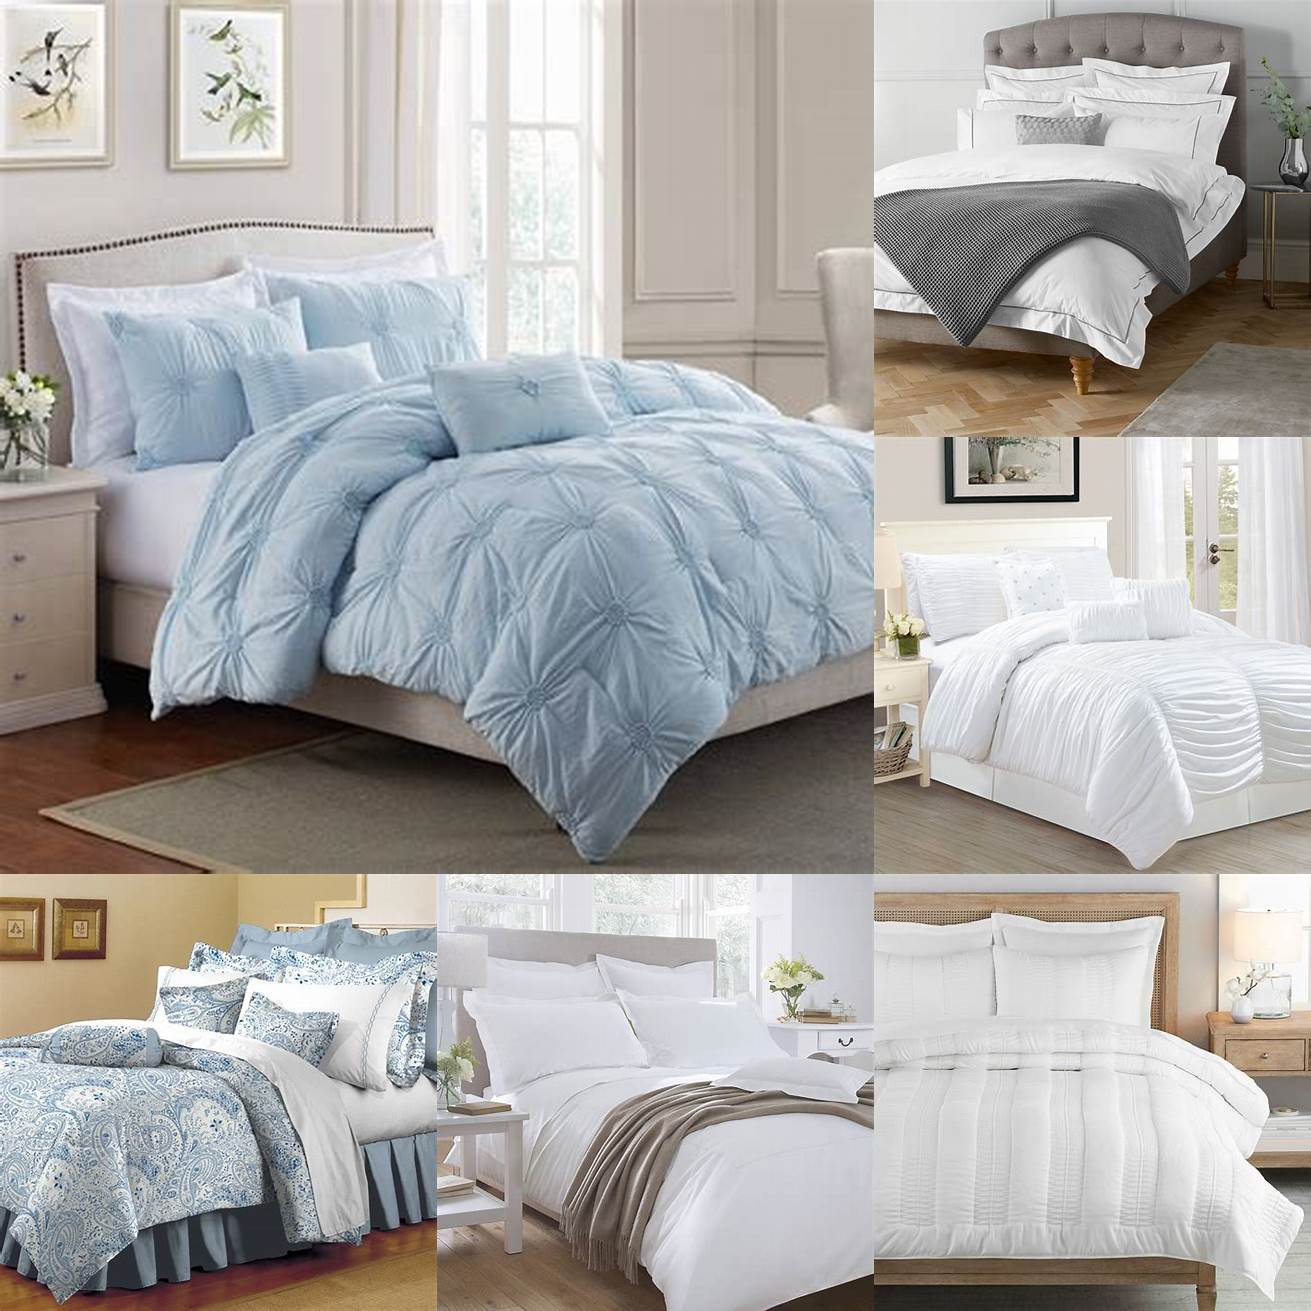 Enhanced Comfort High-quality bedding feels softer and more luxurious than low-quality bedding